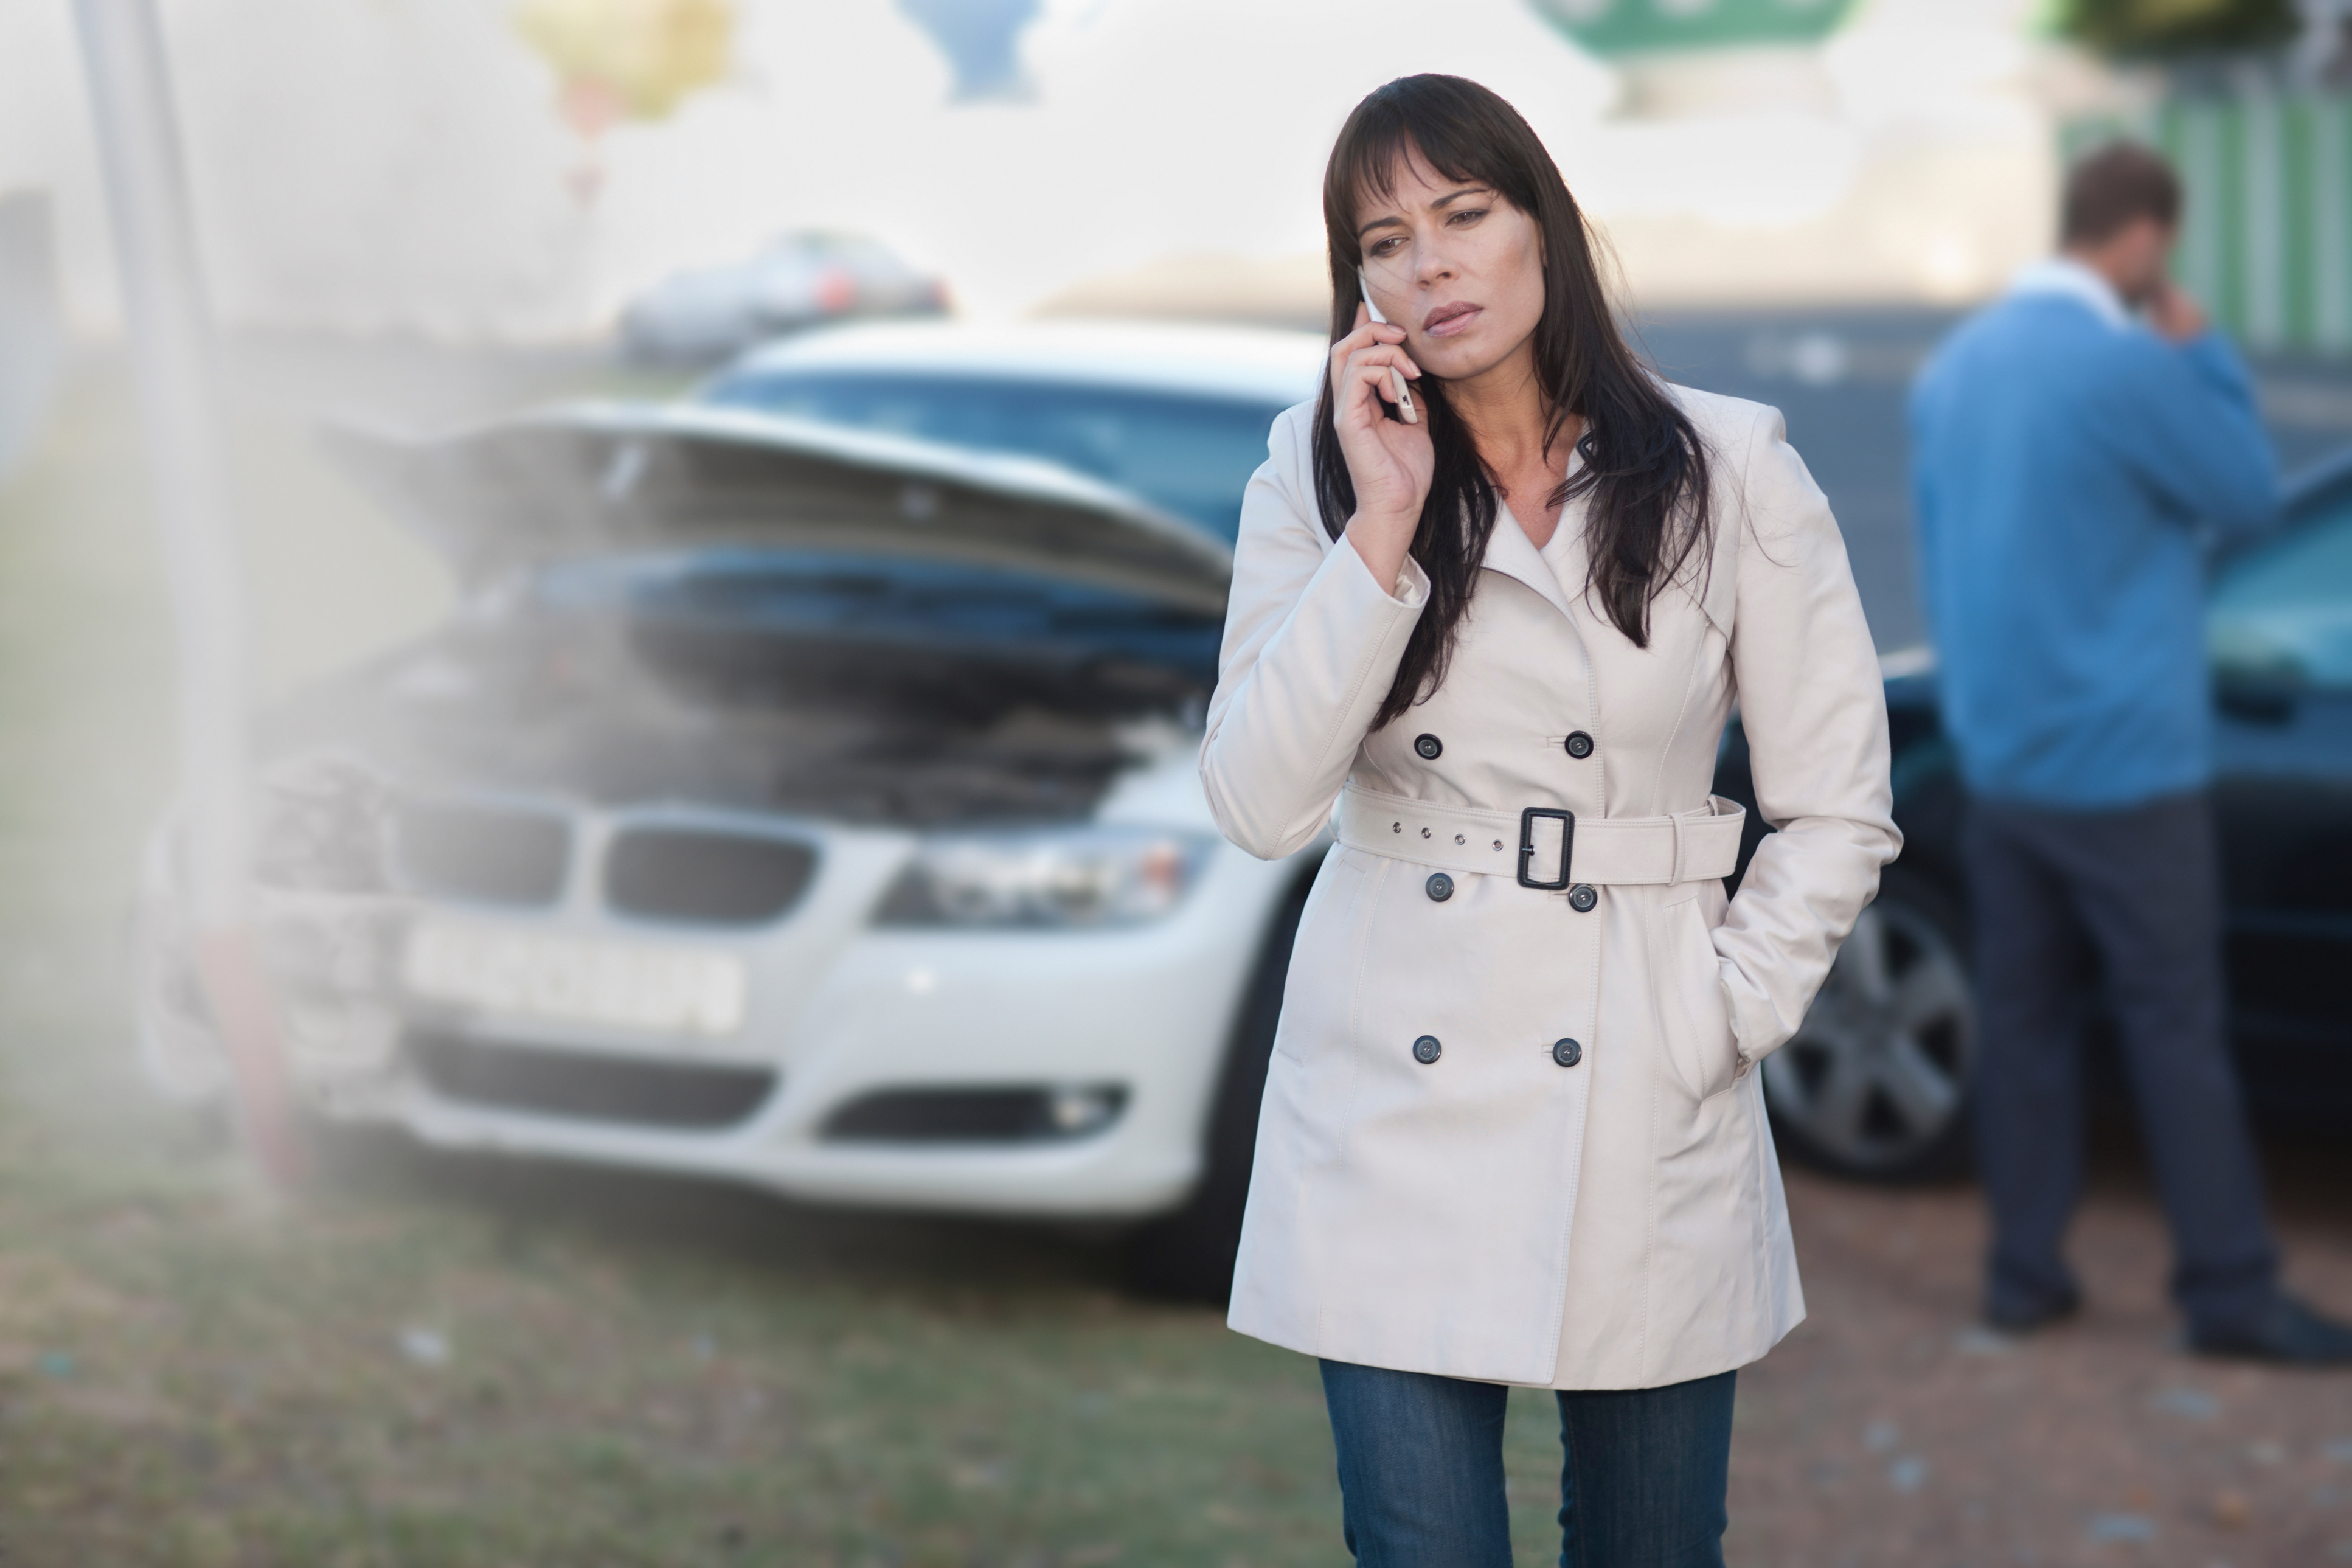 Woman on mobile phone after car accident (Zero Creatives&mdash;Getty Images/Image Source)